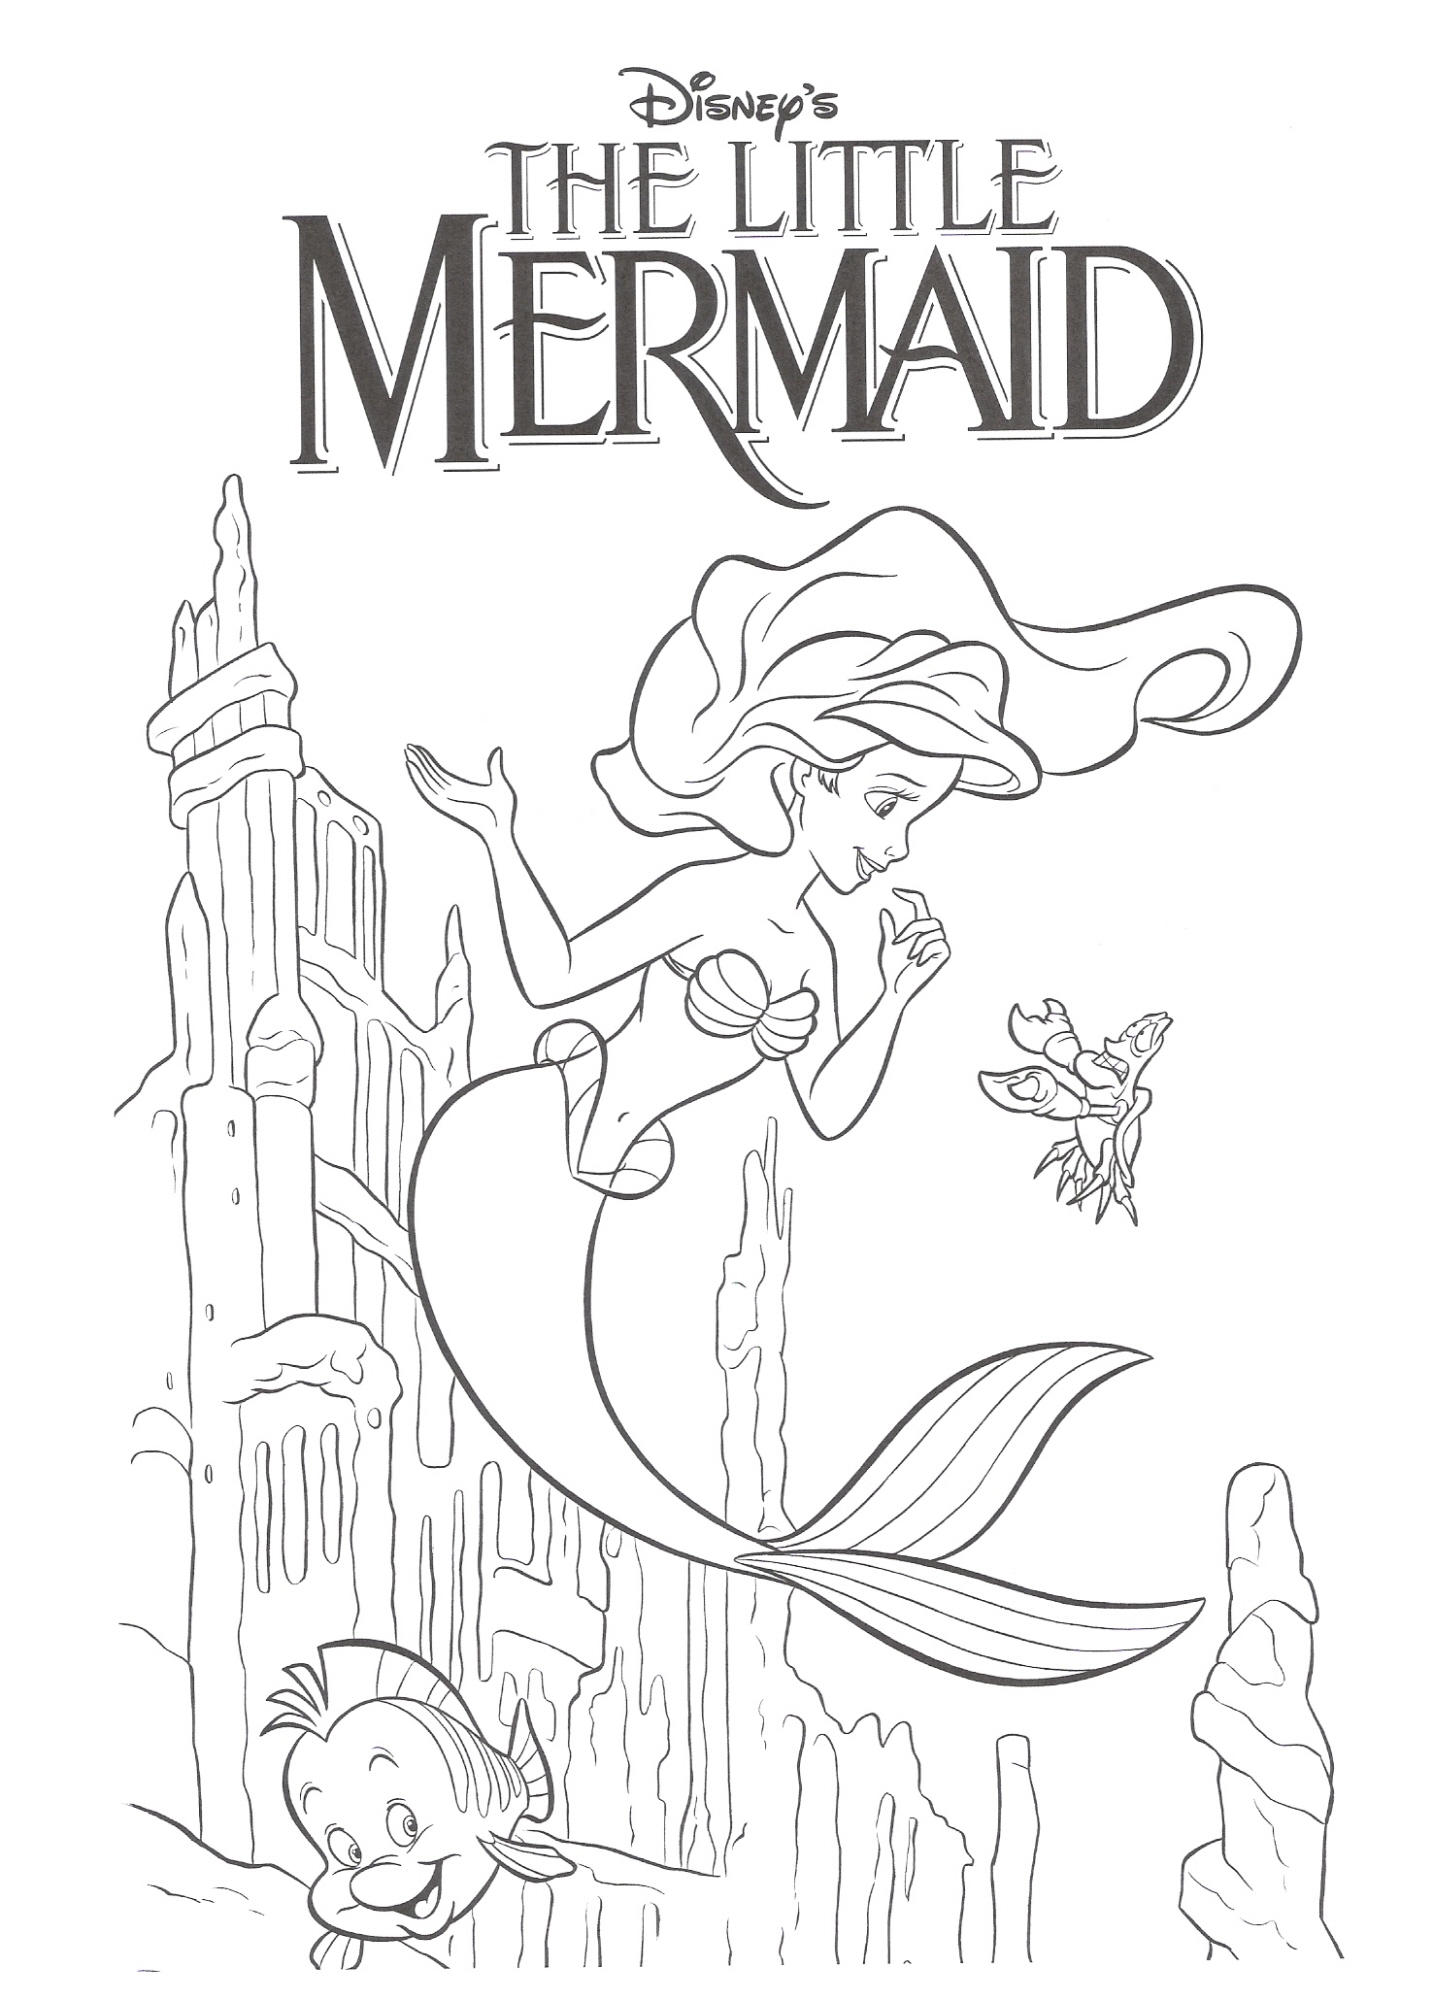 The-Little-Mermaid-Coloring-Pages9 - Coloringkids.org